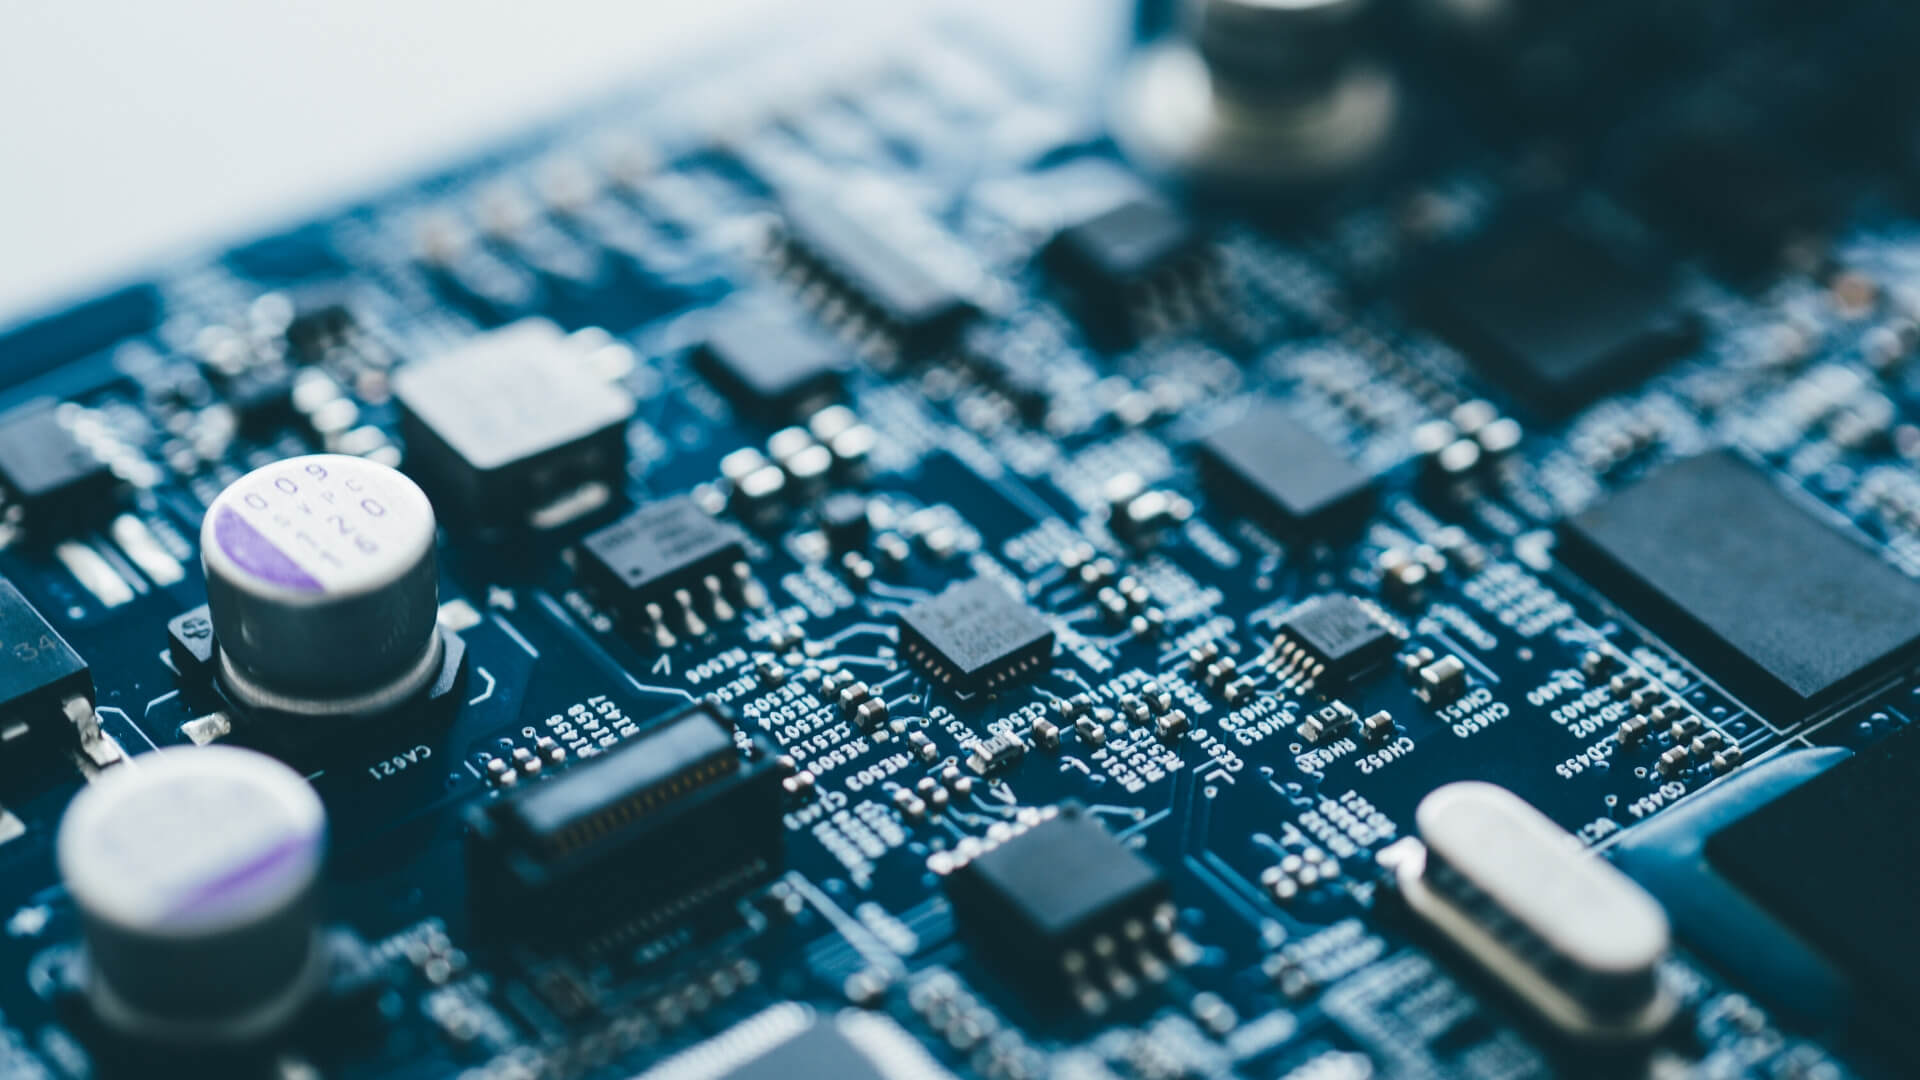 How can we overcome the skills shortage in semiconductors?